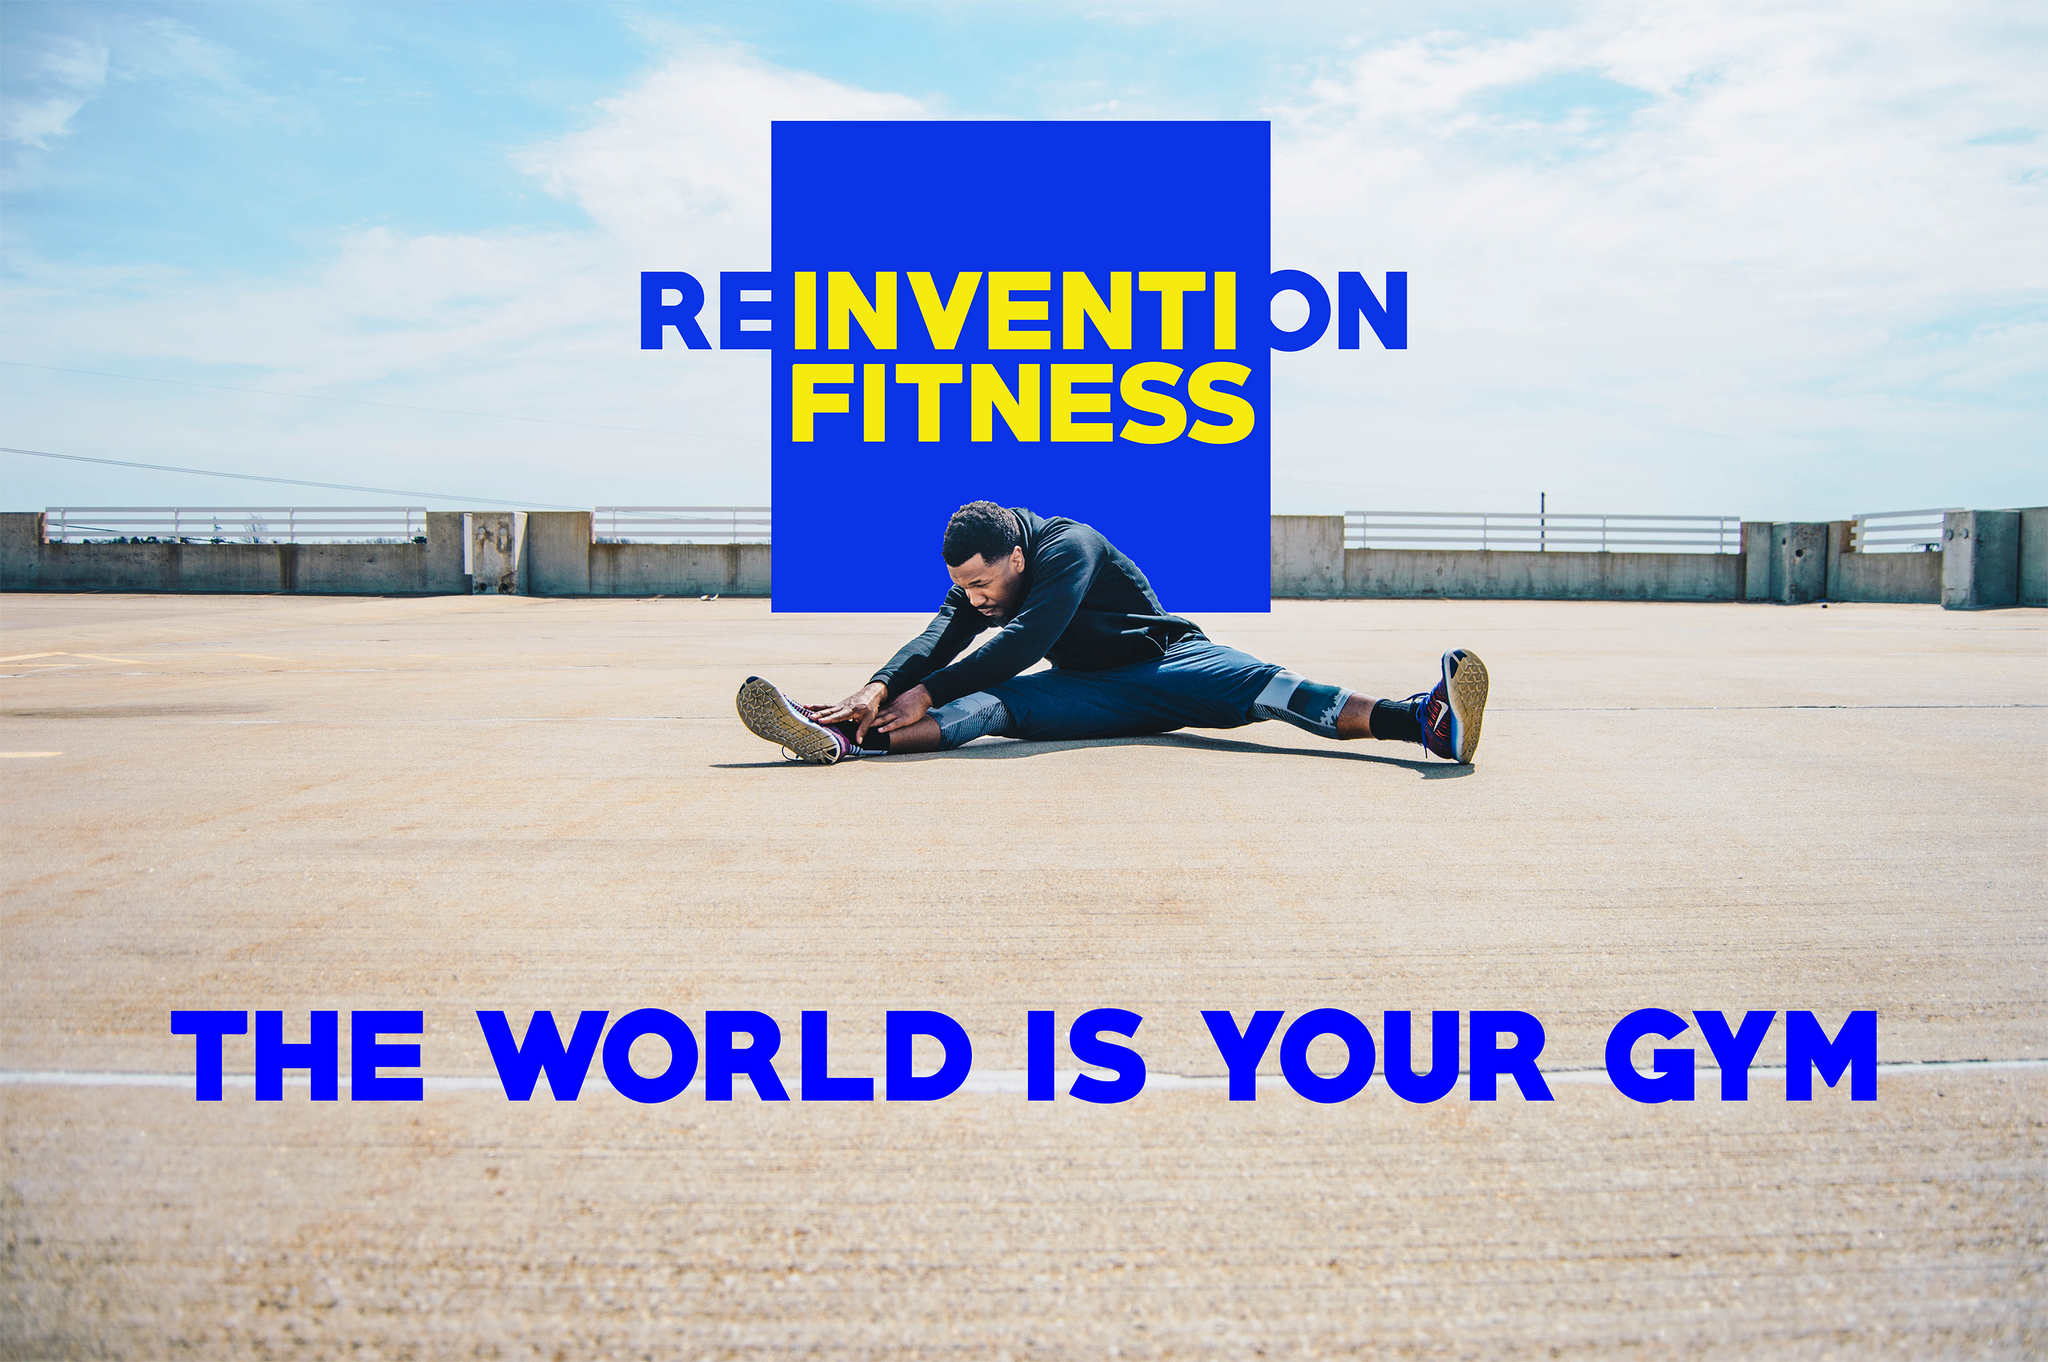 Photo of man stretching in front of Reinvention Fitness logo